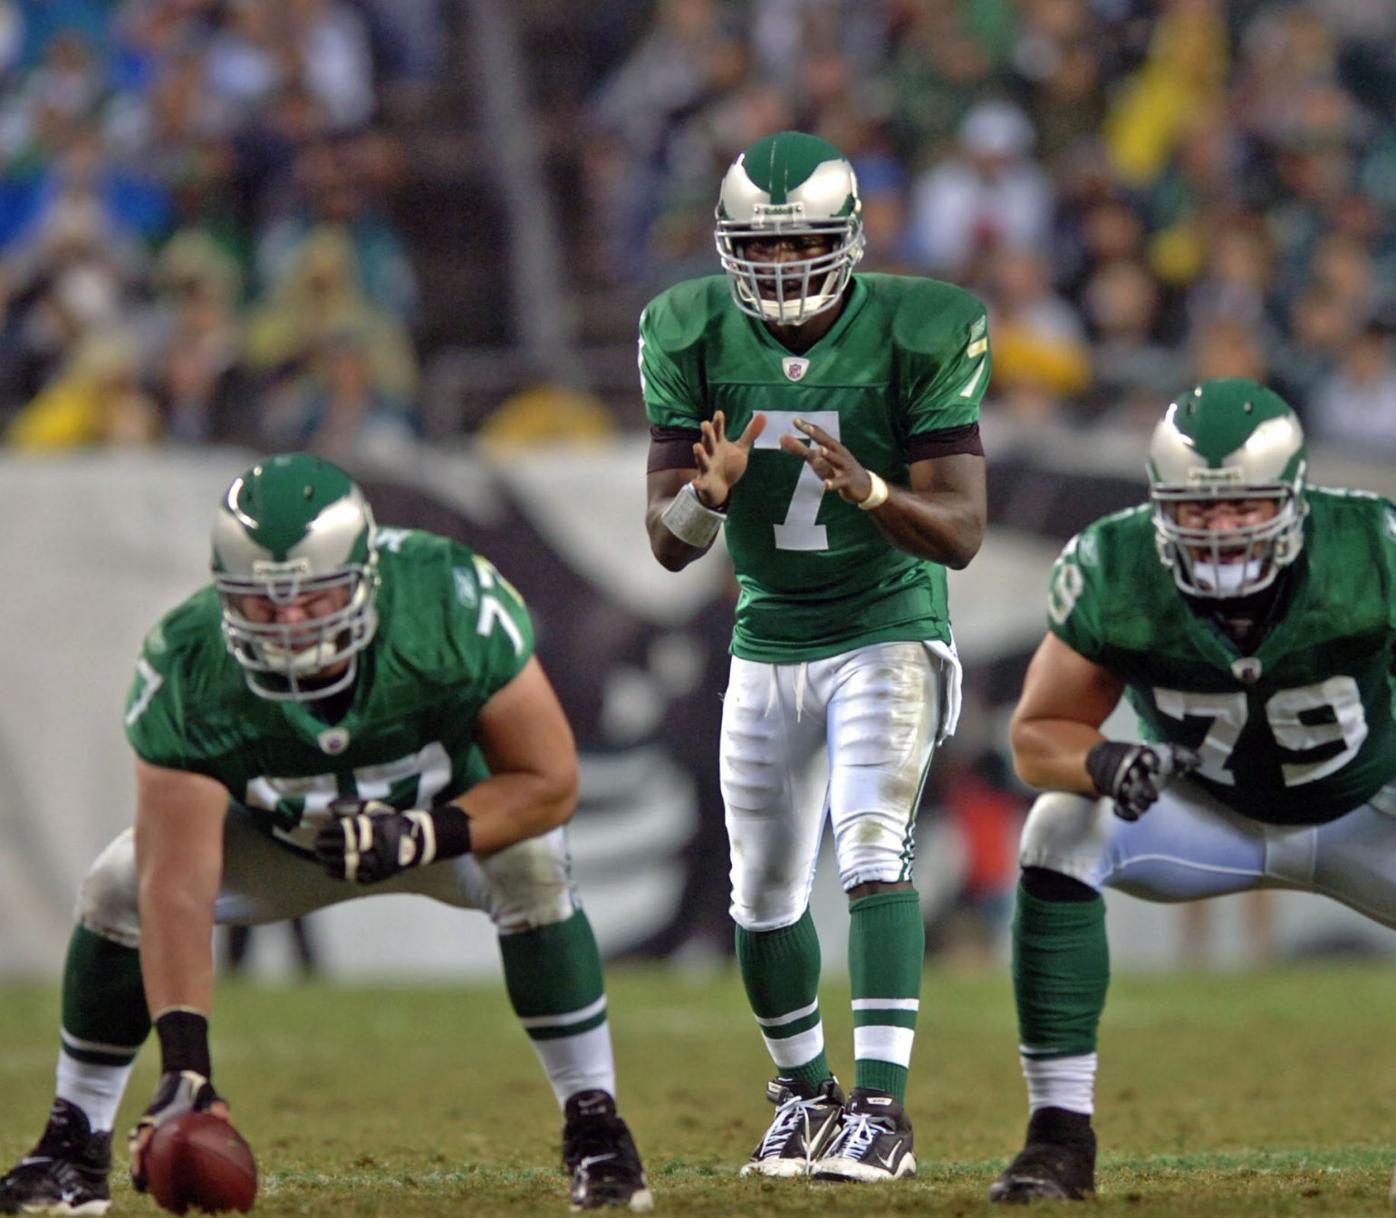 Eagles owner Jeffrey Lurie wants his team to wear Kelly green, NFL